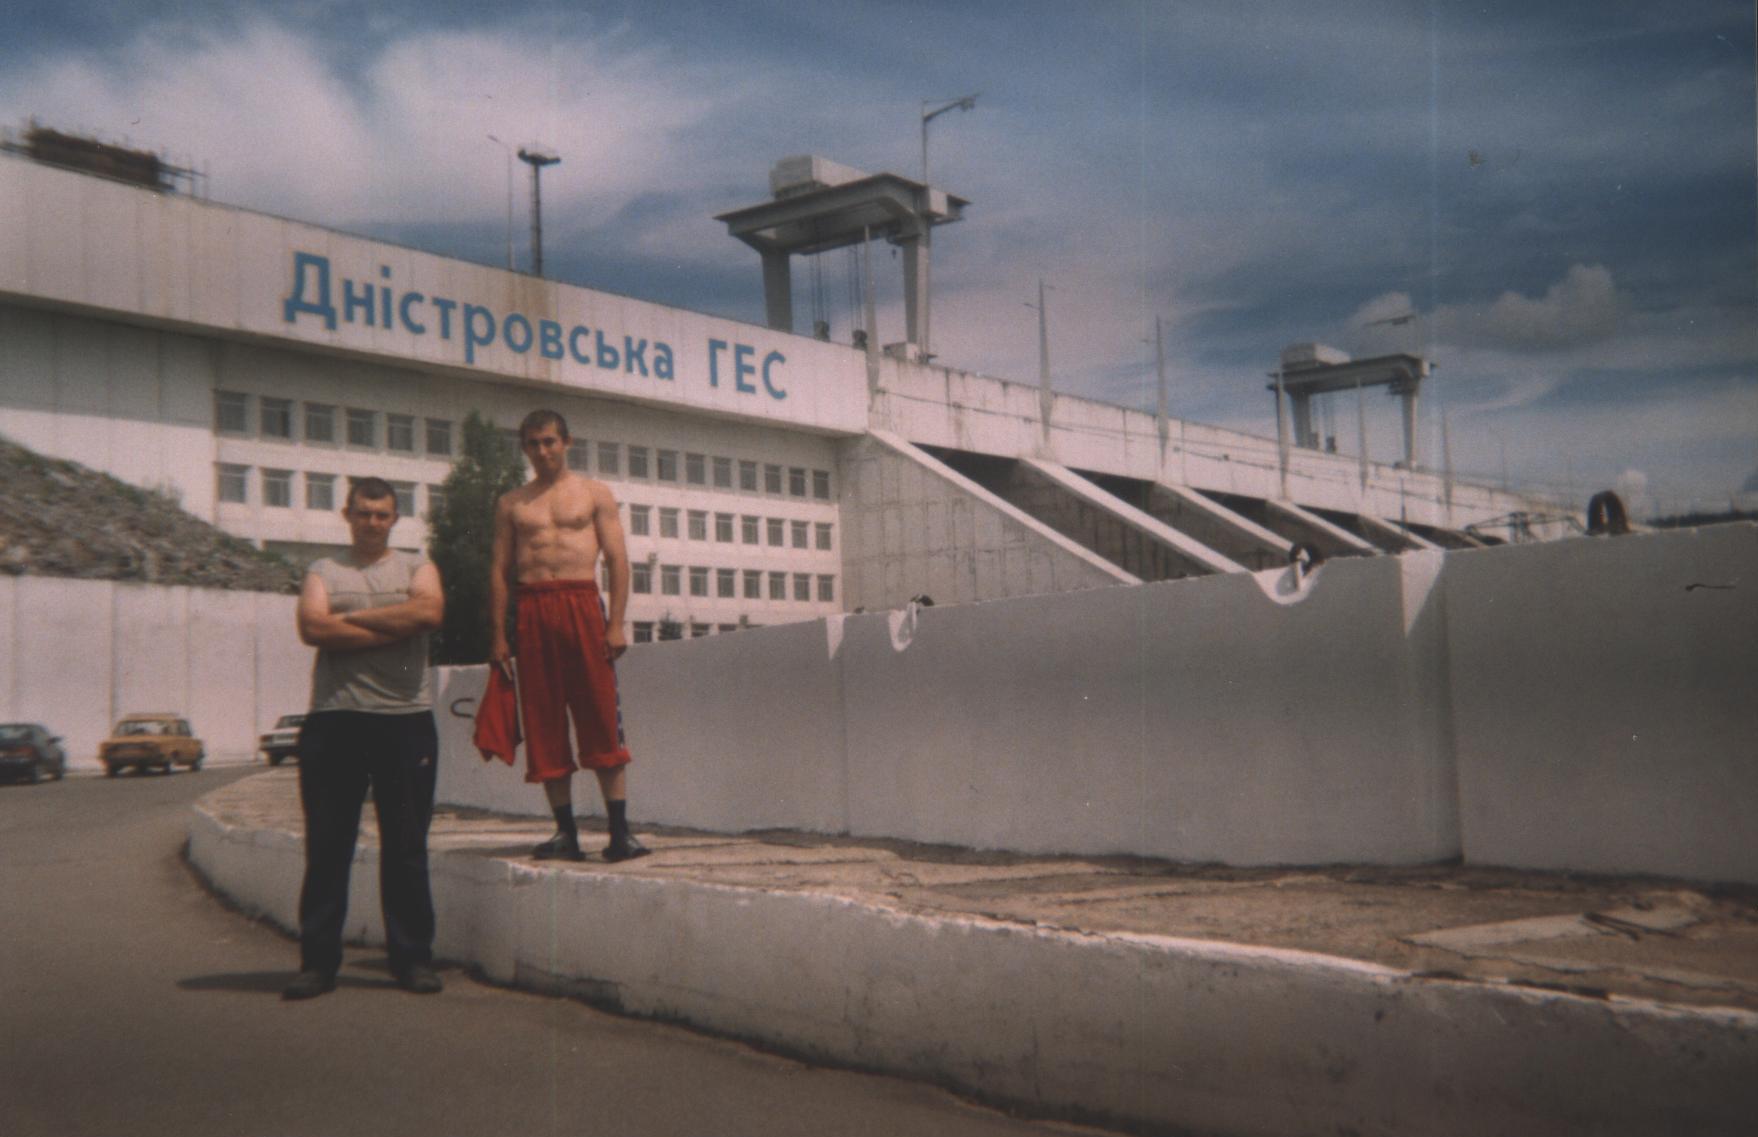 My friend and i in front of the Dniester hydro power plant